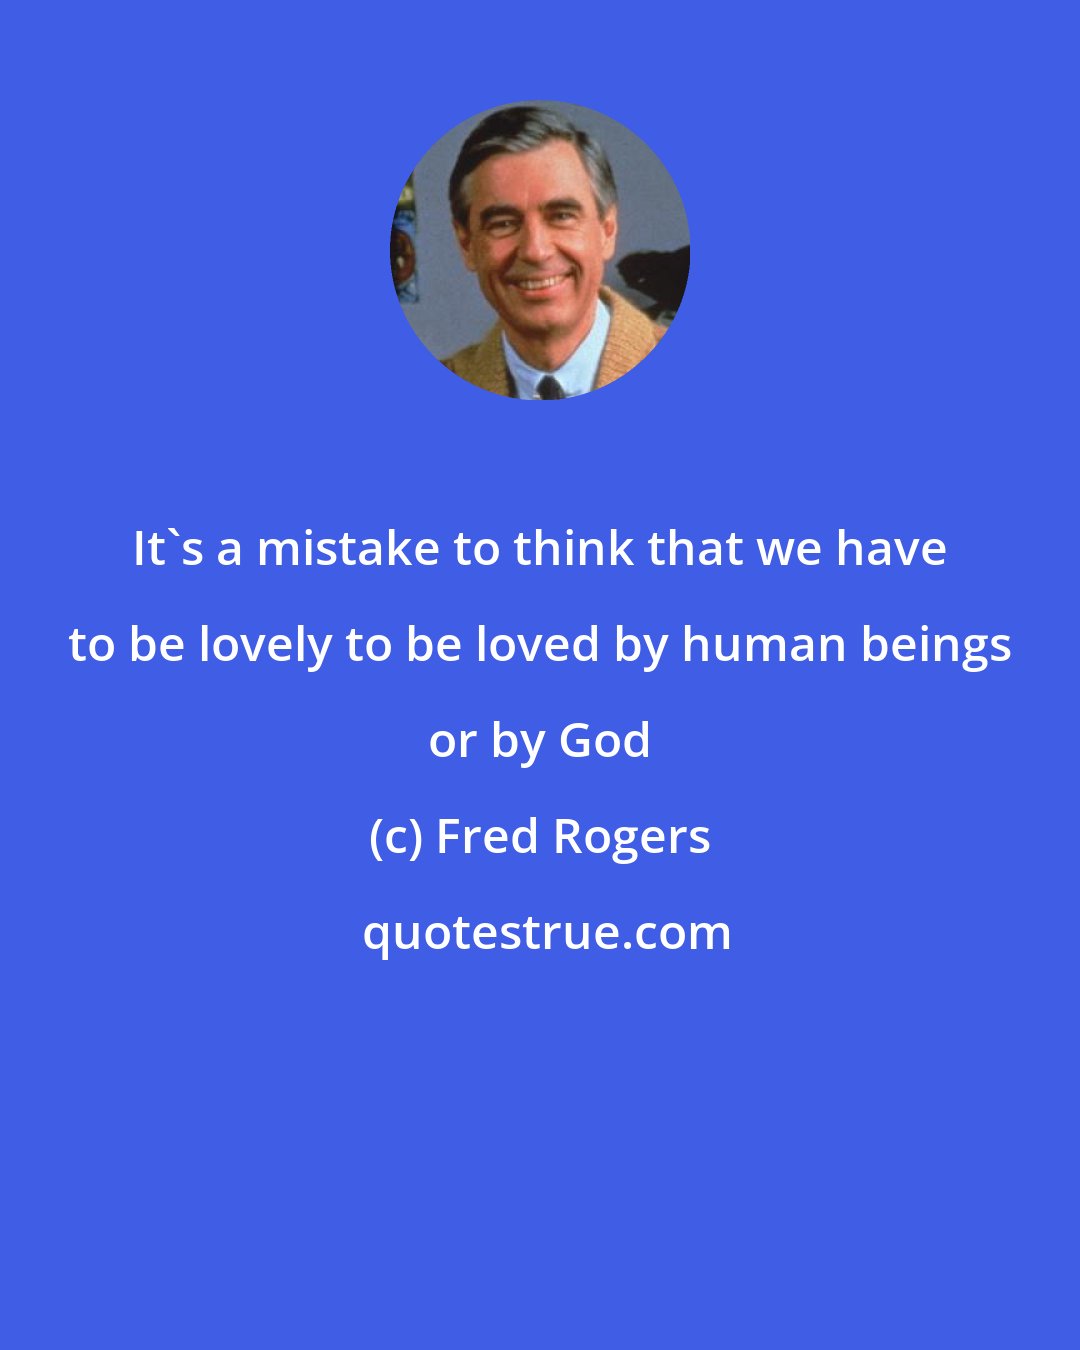 Fred Rogers: It's a mistake to think that we have to be lovely to be loved by human beings or by God